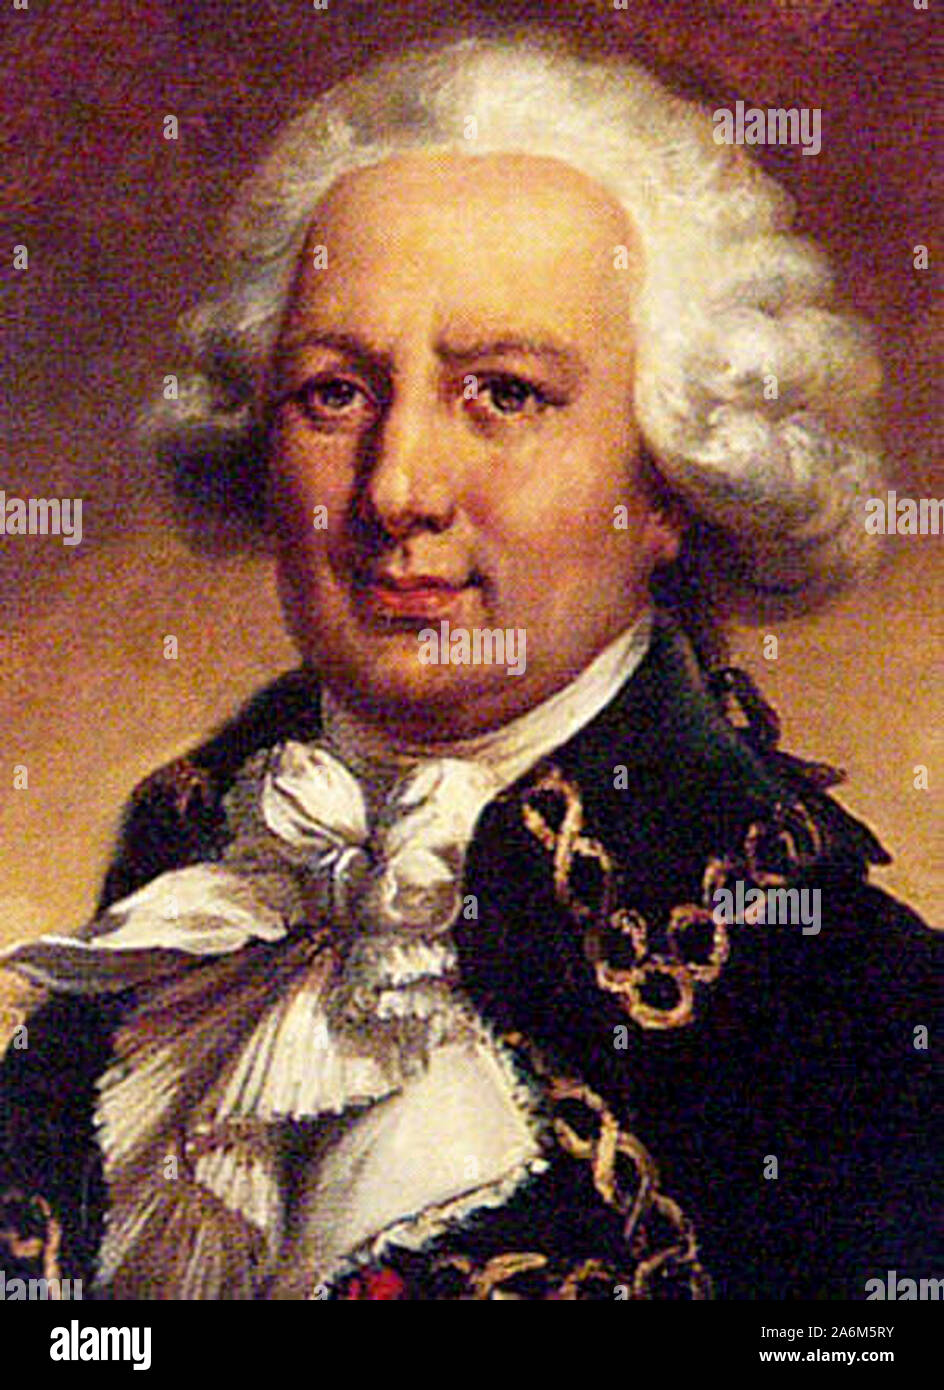 Louis-Antoine de Bougainville, by Jean-Pierre Franquel. Louis-Antoine, Comte de Bougainville (1729 – 1811) French admiral and explorer. Also known for having the Bougainvillea flower were named after him Stock Photo